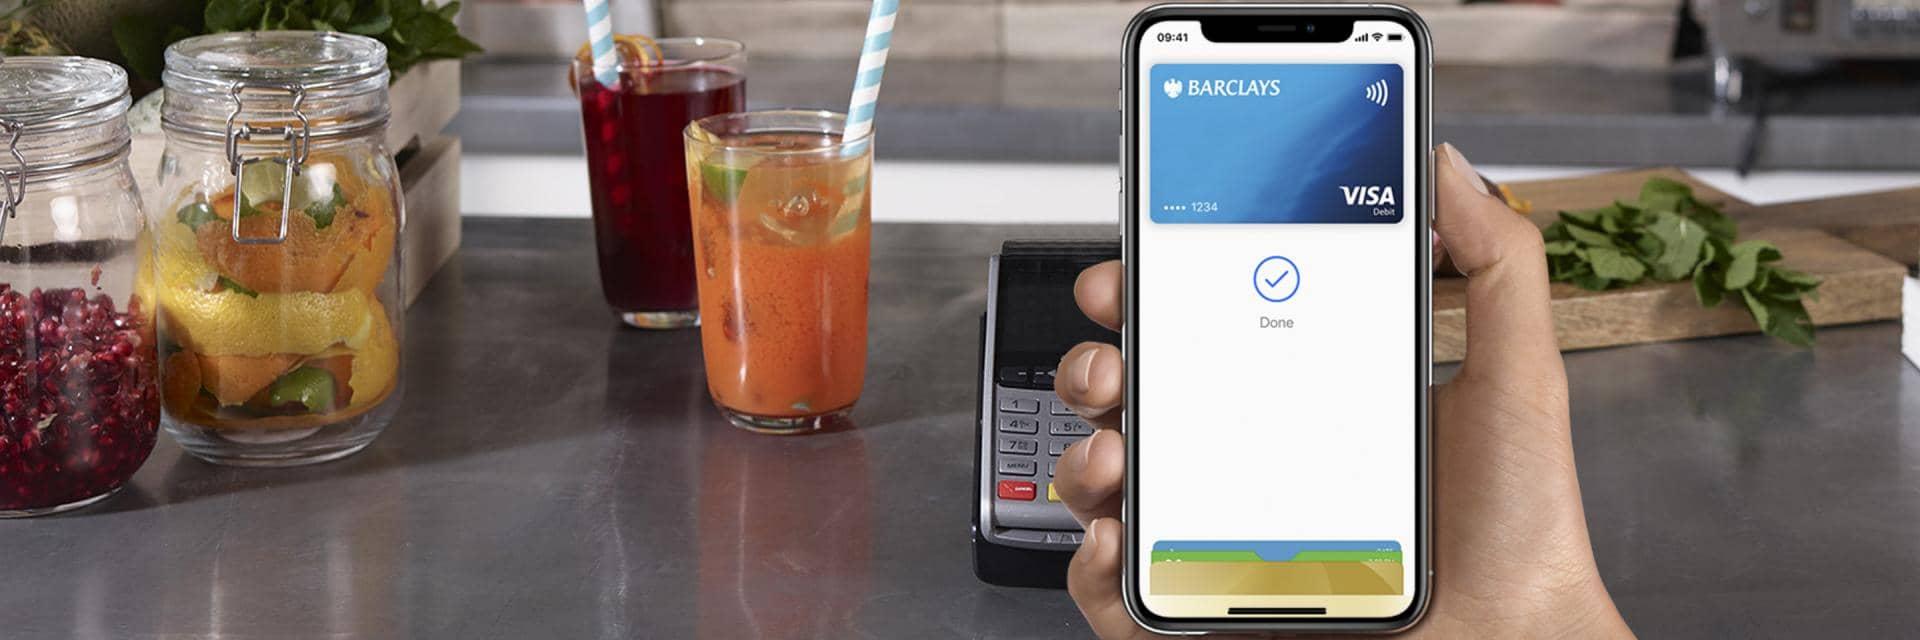 A phone screen using Apple Pay with a Barclays card to make a payment.